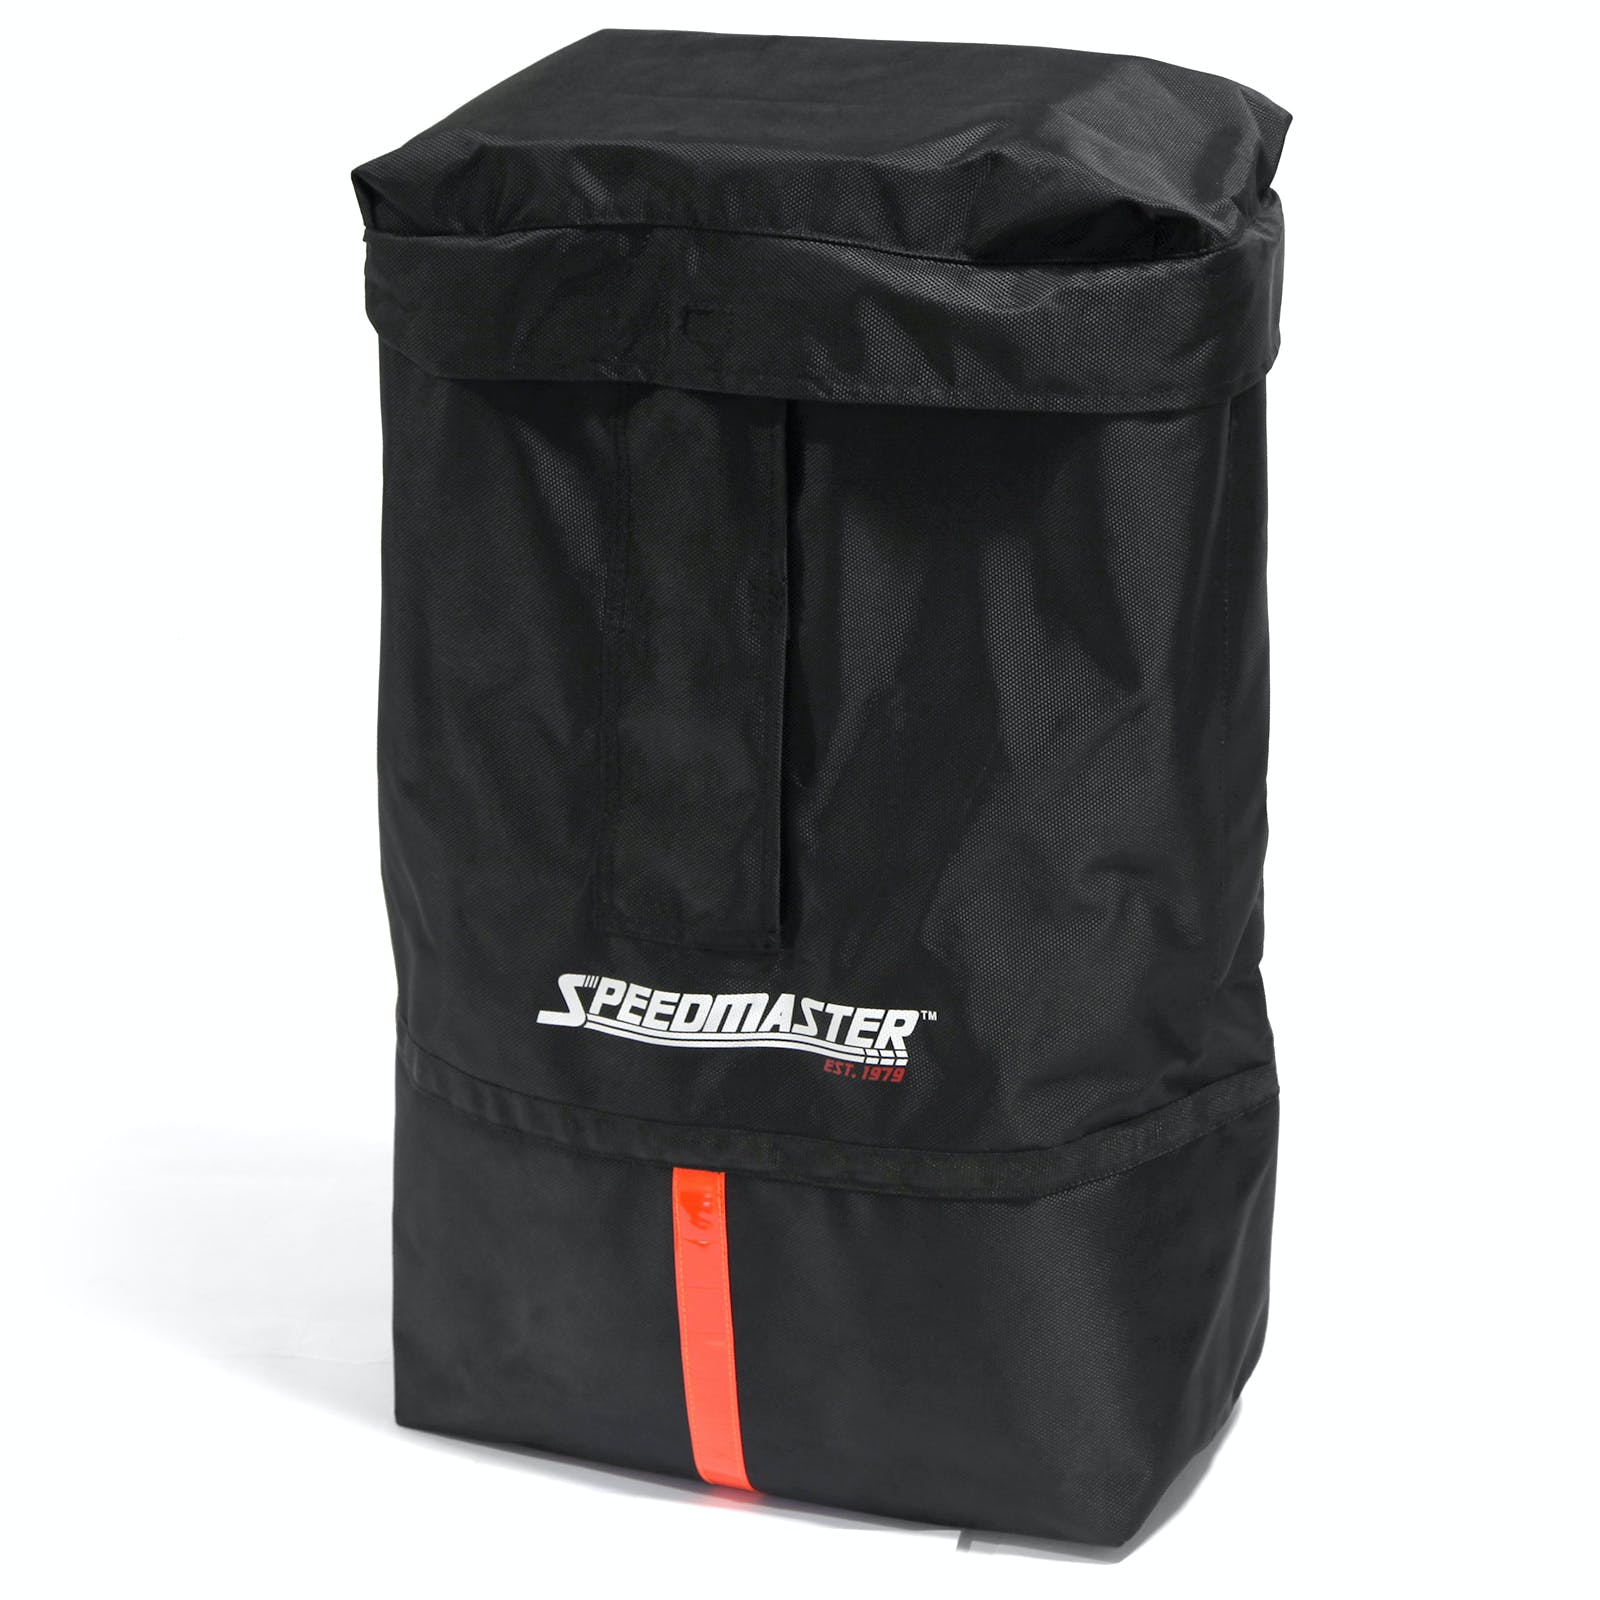 Speedmaster PCE568.1001 Rear Spare Wheel Storage Rubbish and Recovery Kit Bag Spare Tire